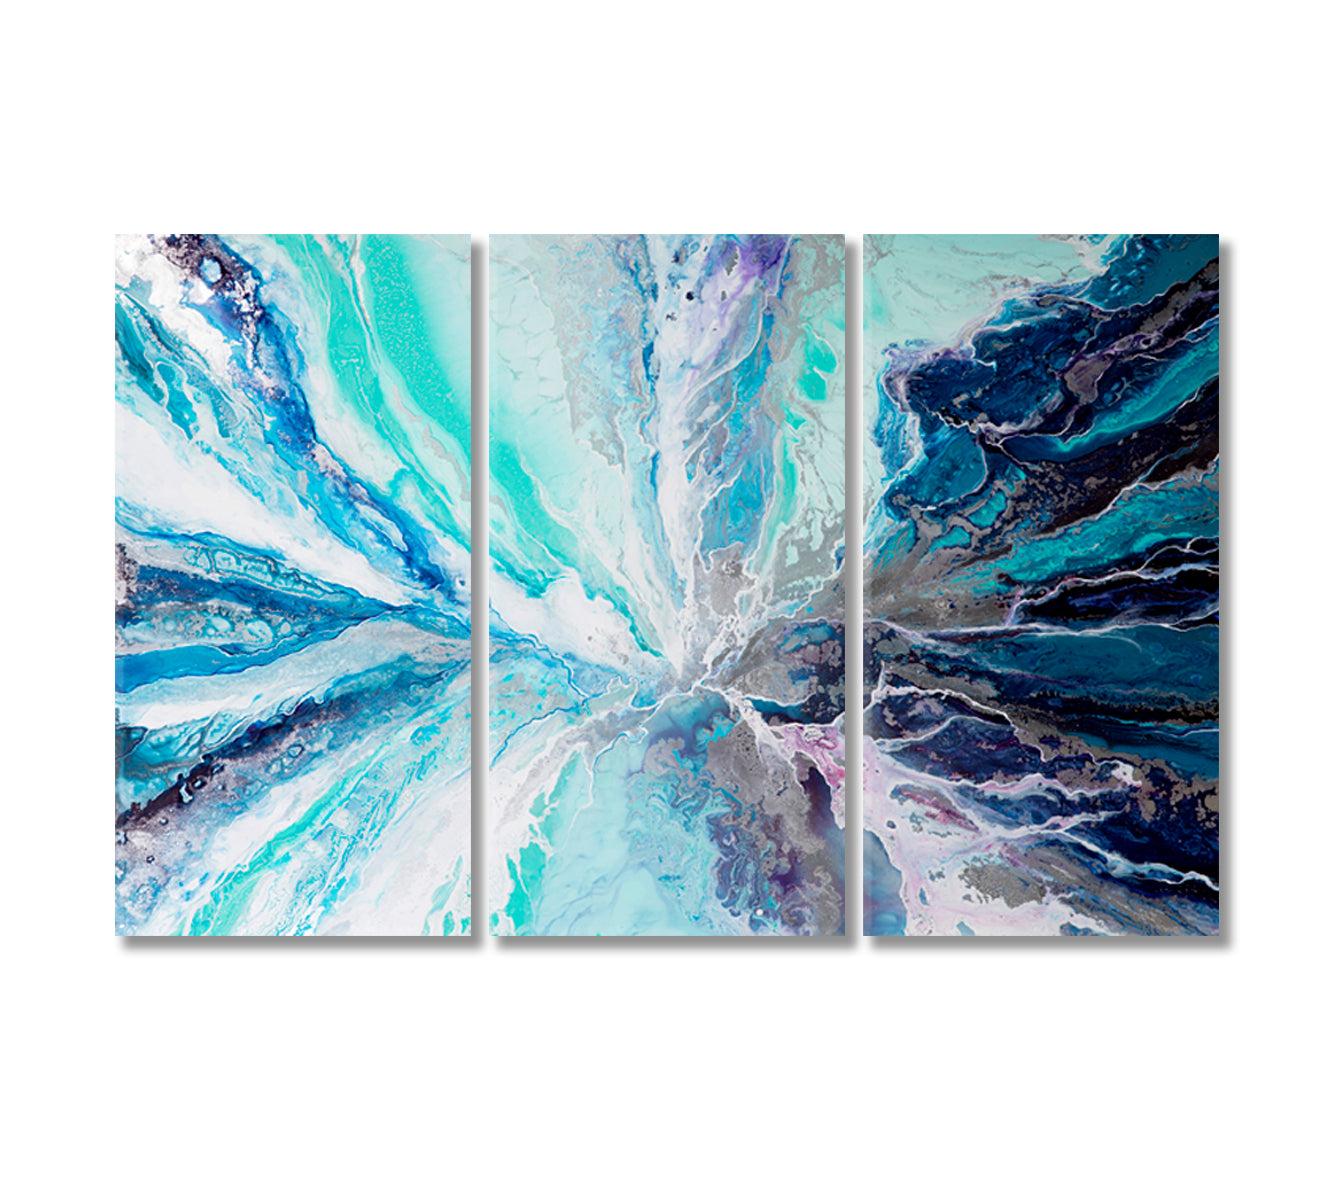 Stunning Light Blue and Dark Blue Abstract Marble Shapes Canvas Print-Canvas Print-CetArt-3 Panels-36x24 inches-CetArt